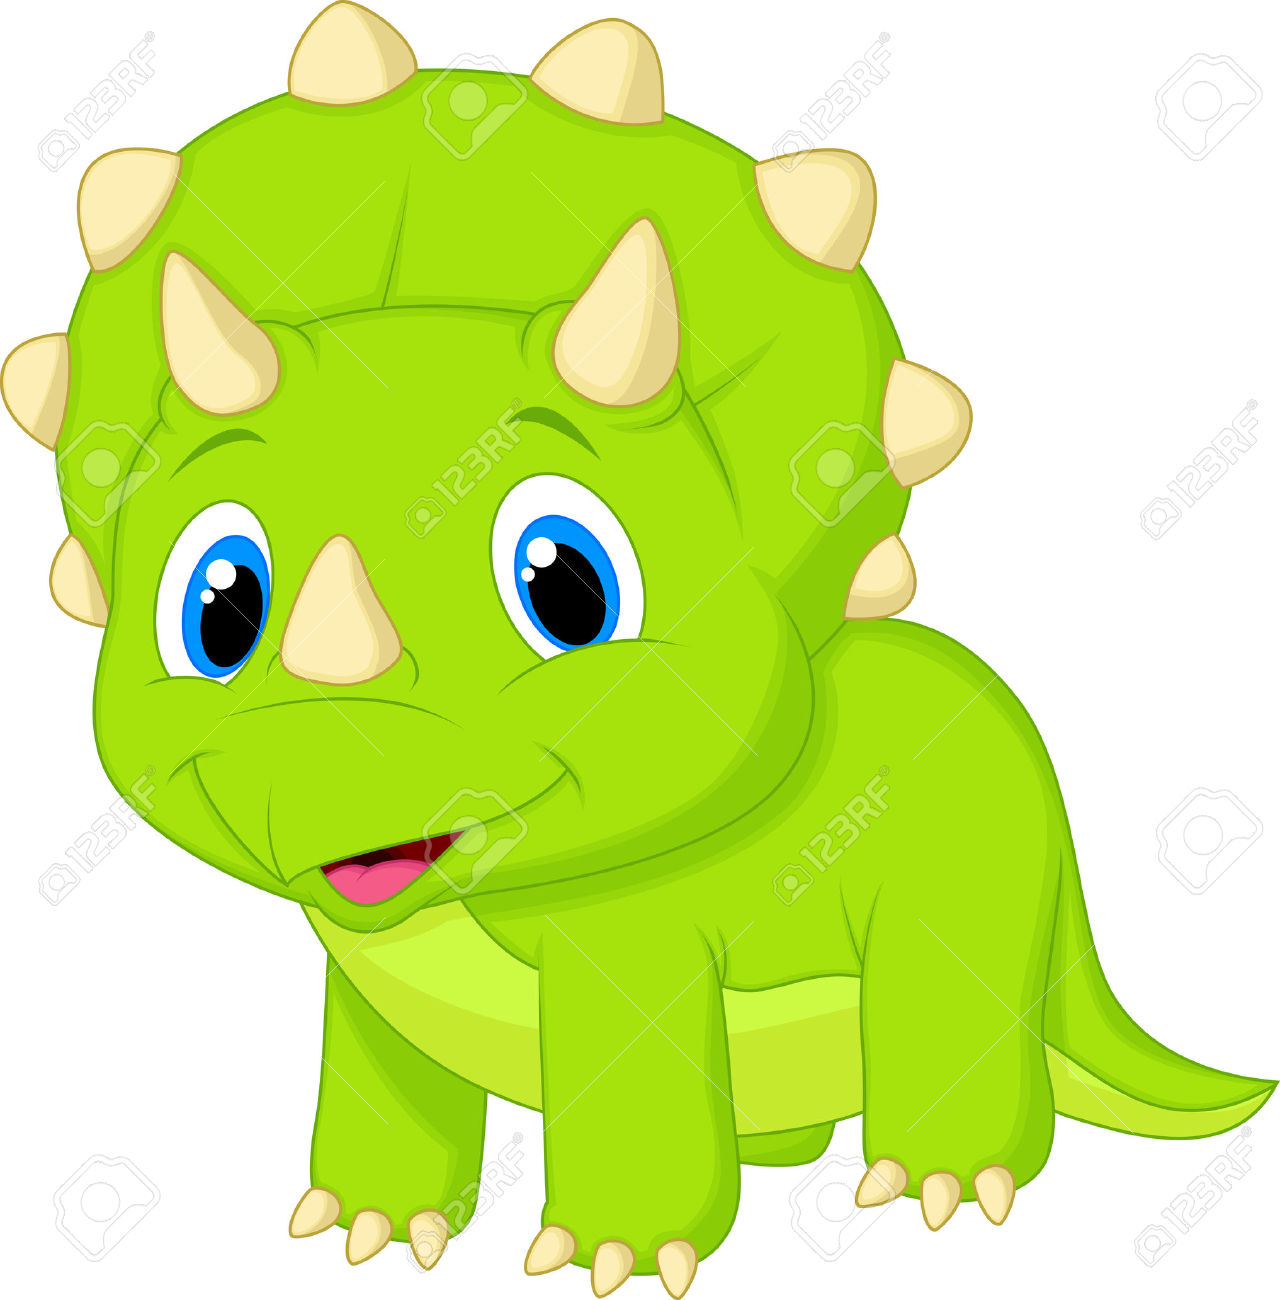 Collection of Dino clipart Free download best Dino clipart on